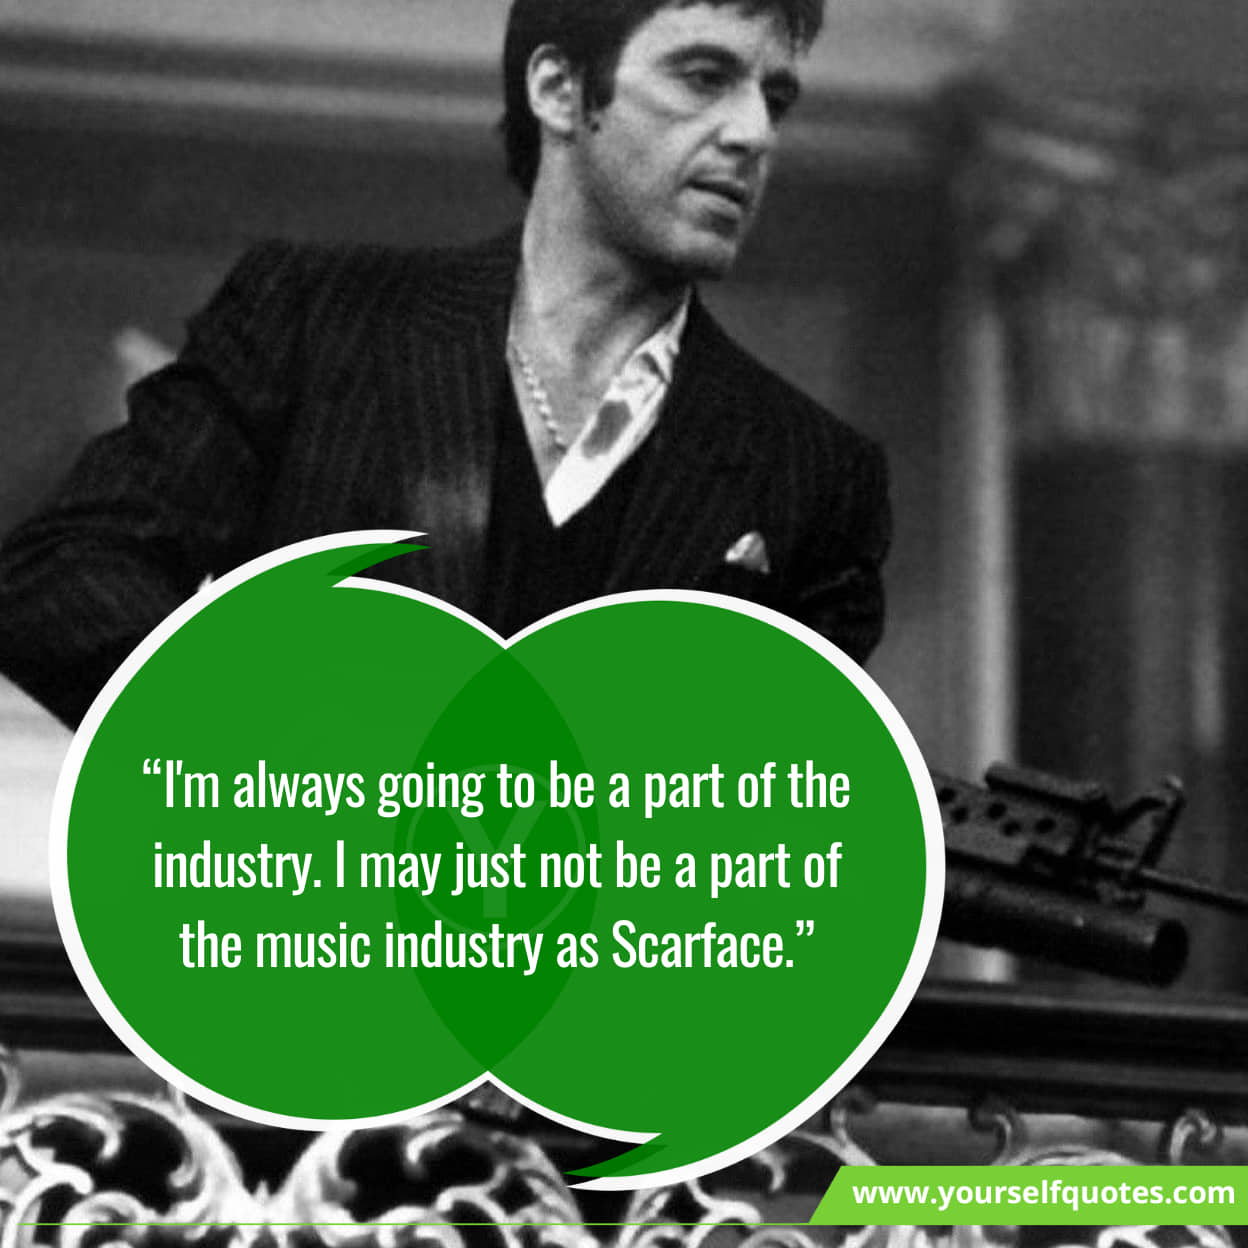 Scarface quotes on wealth and success